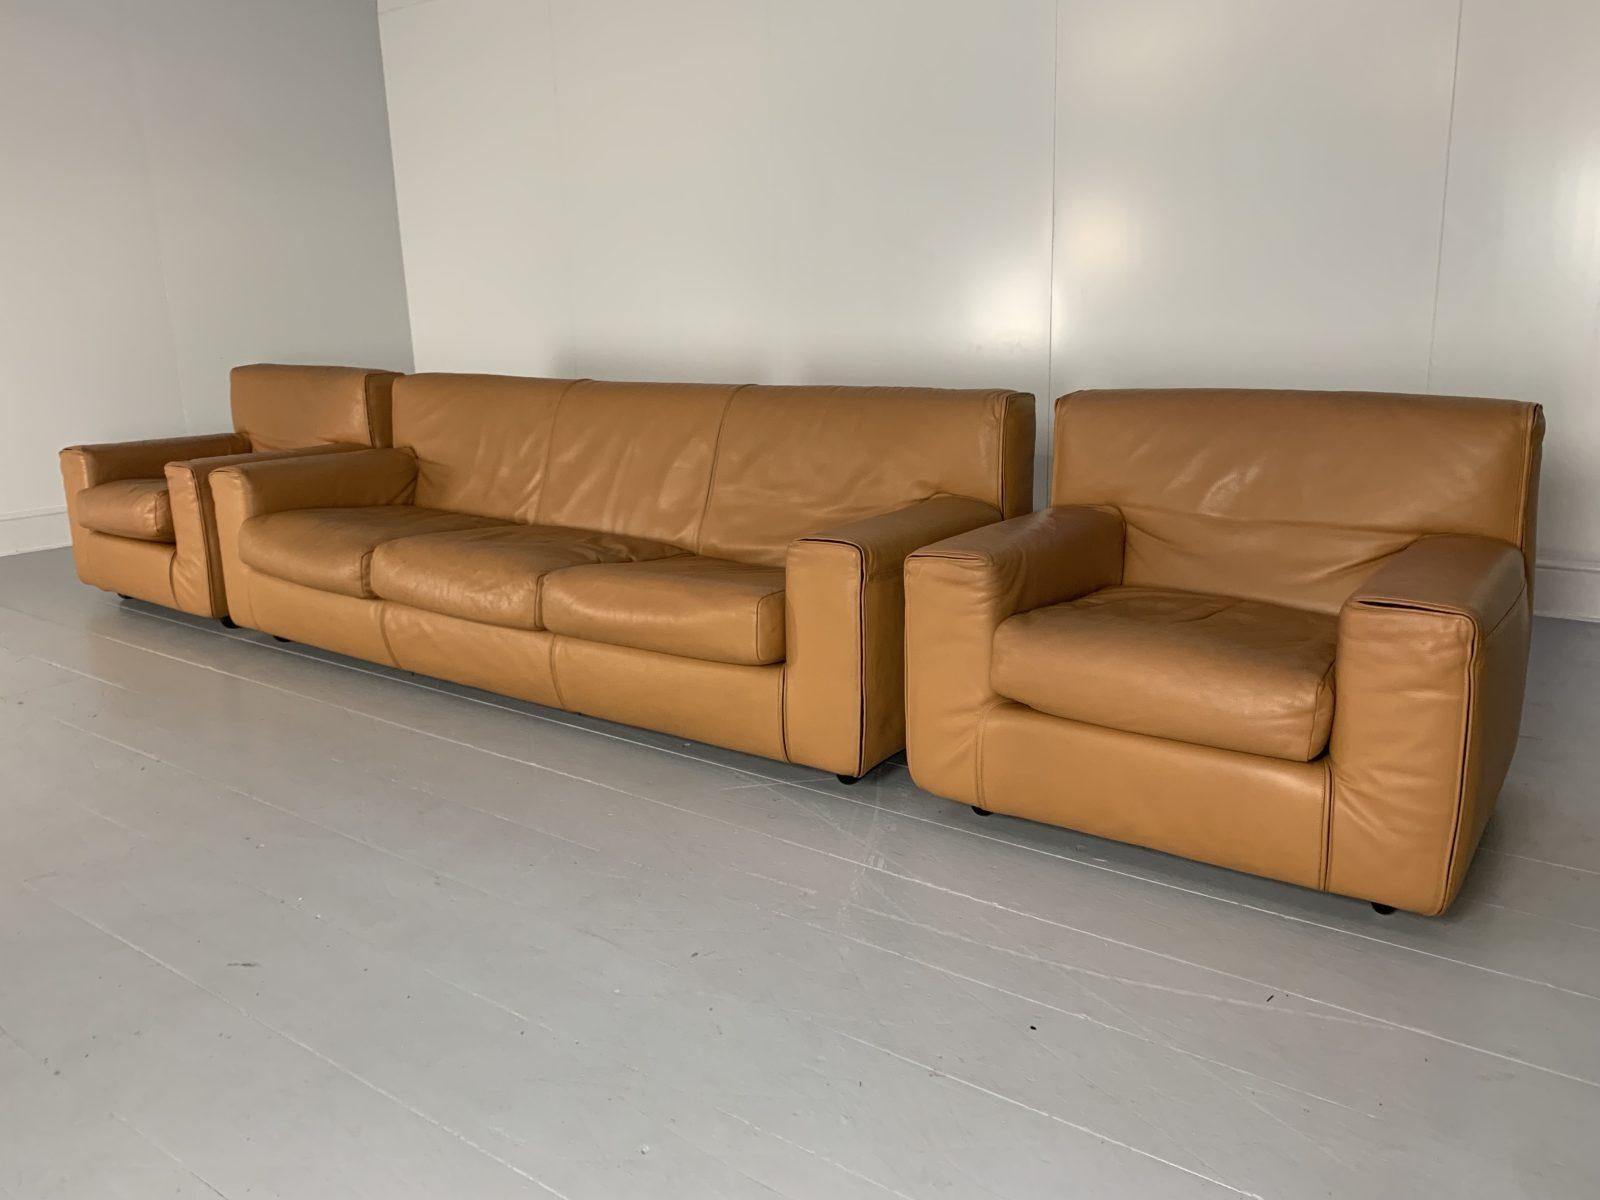 Cassina Sofa & 2 Armchair Suite, in Tan Brown Leather In Good Condition For Sale In Barrowford, GB